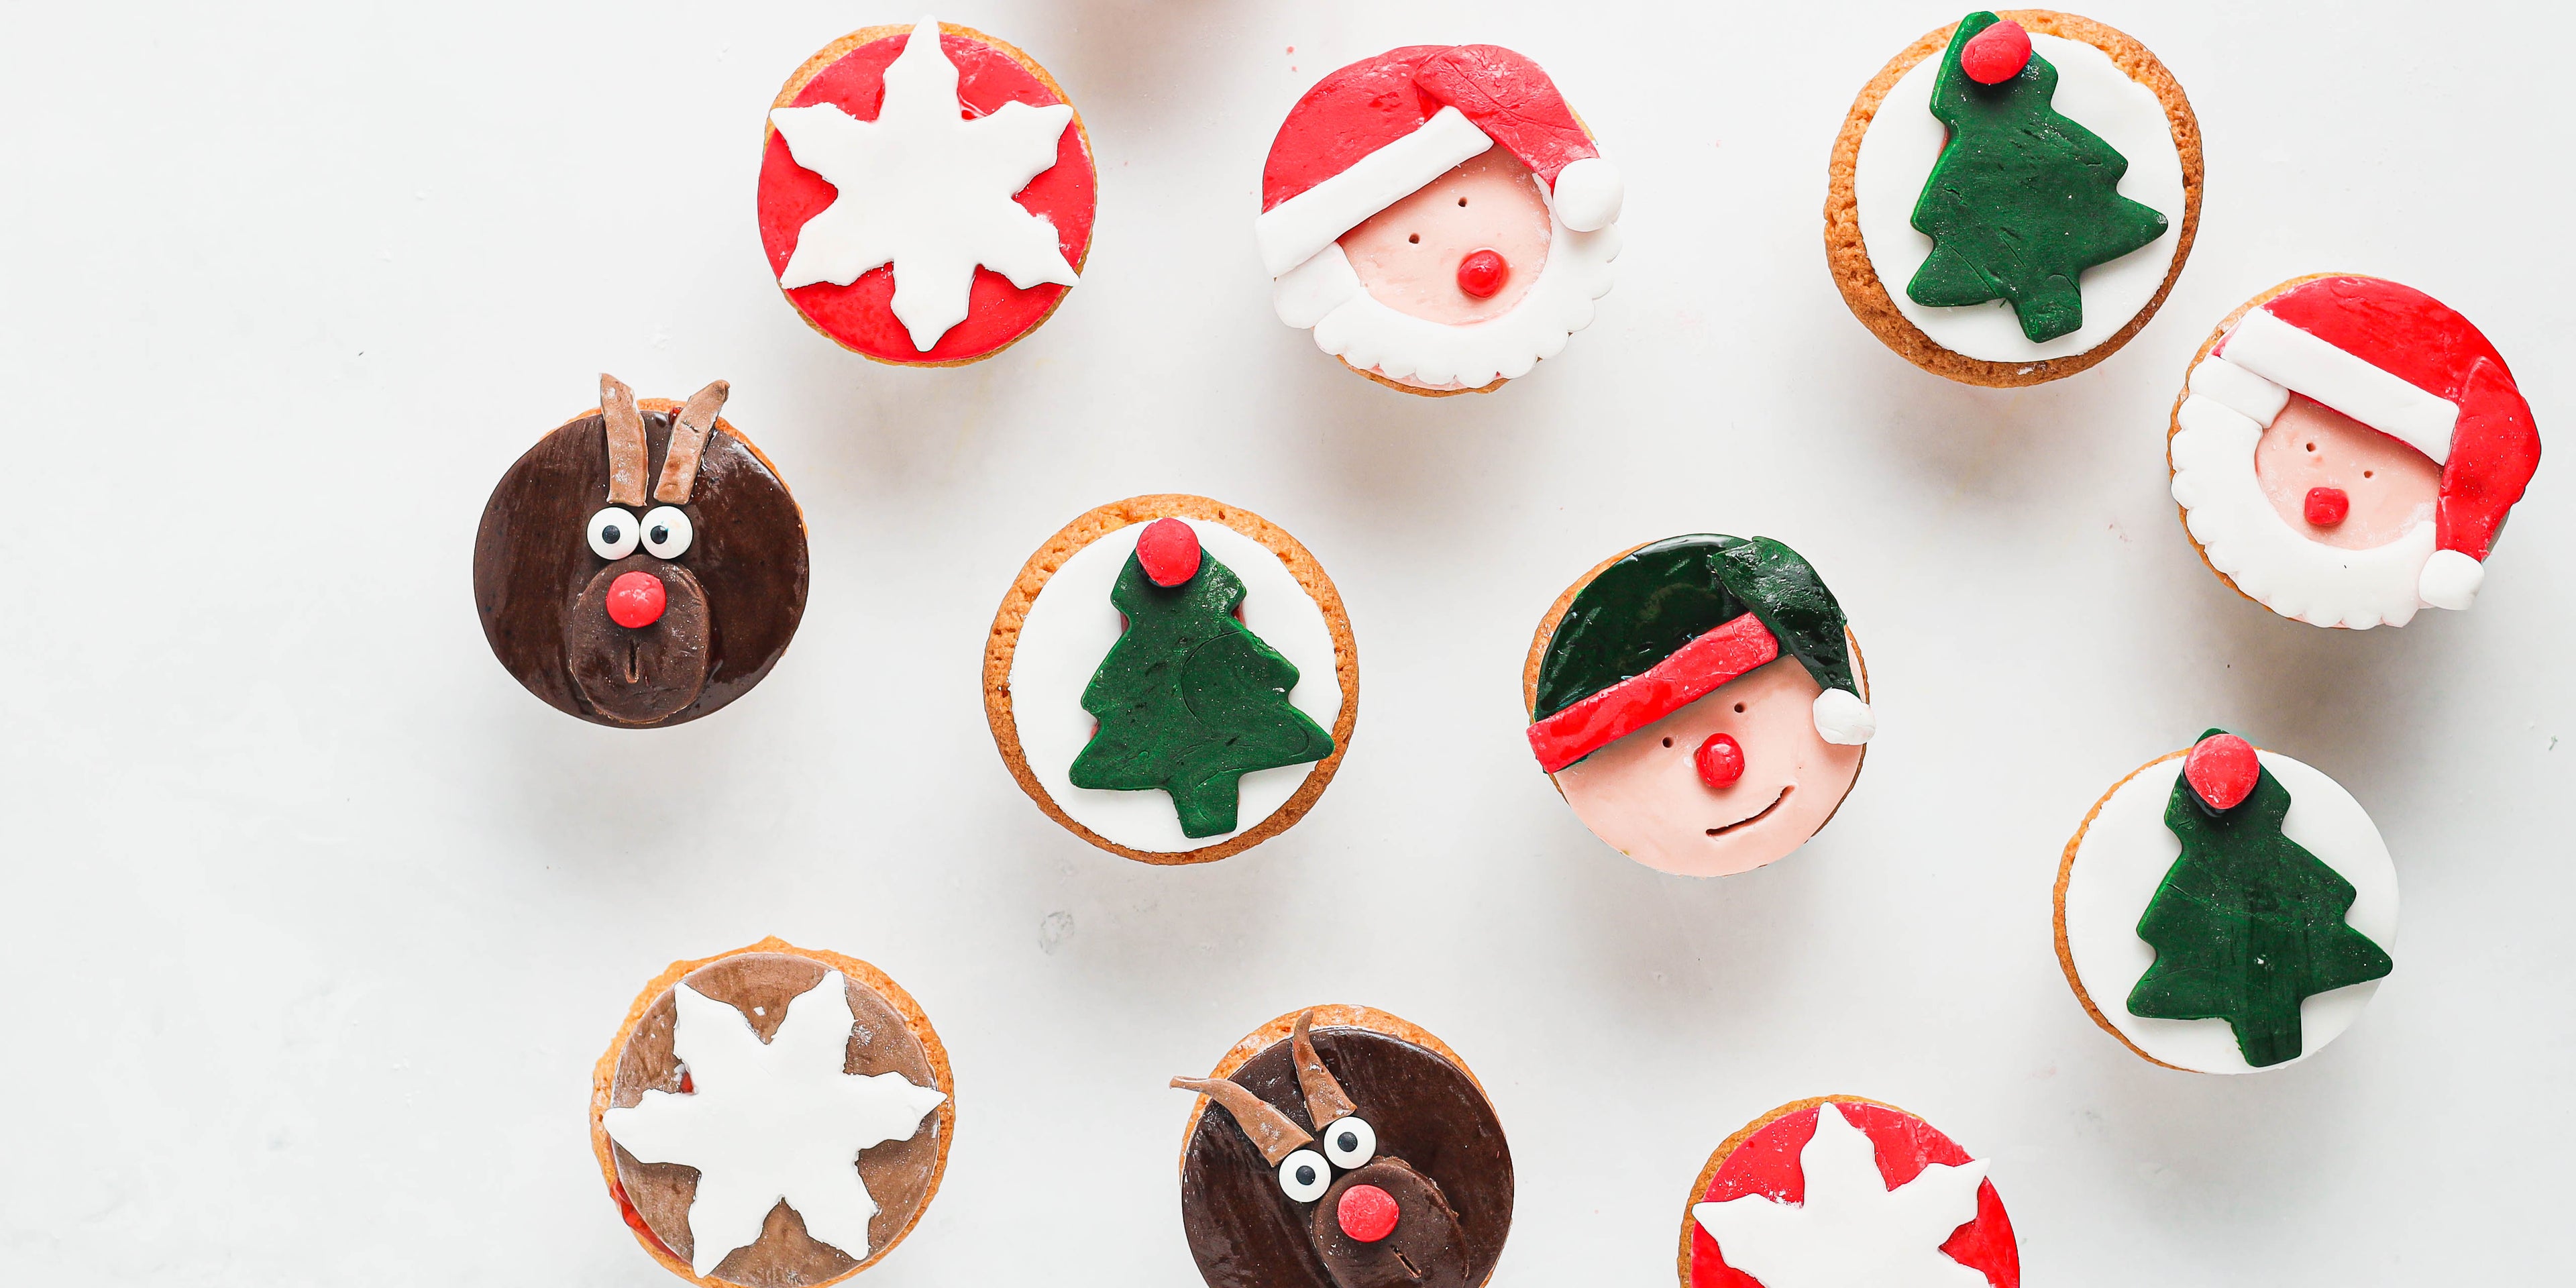 Top view of Christmas Cupcakes decorated in icing with santa, reindeers and stars